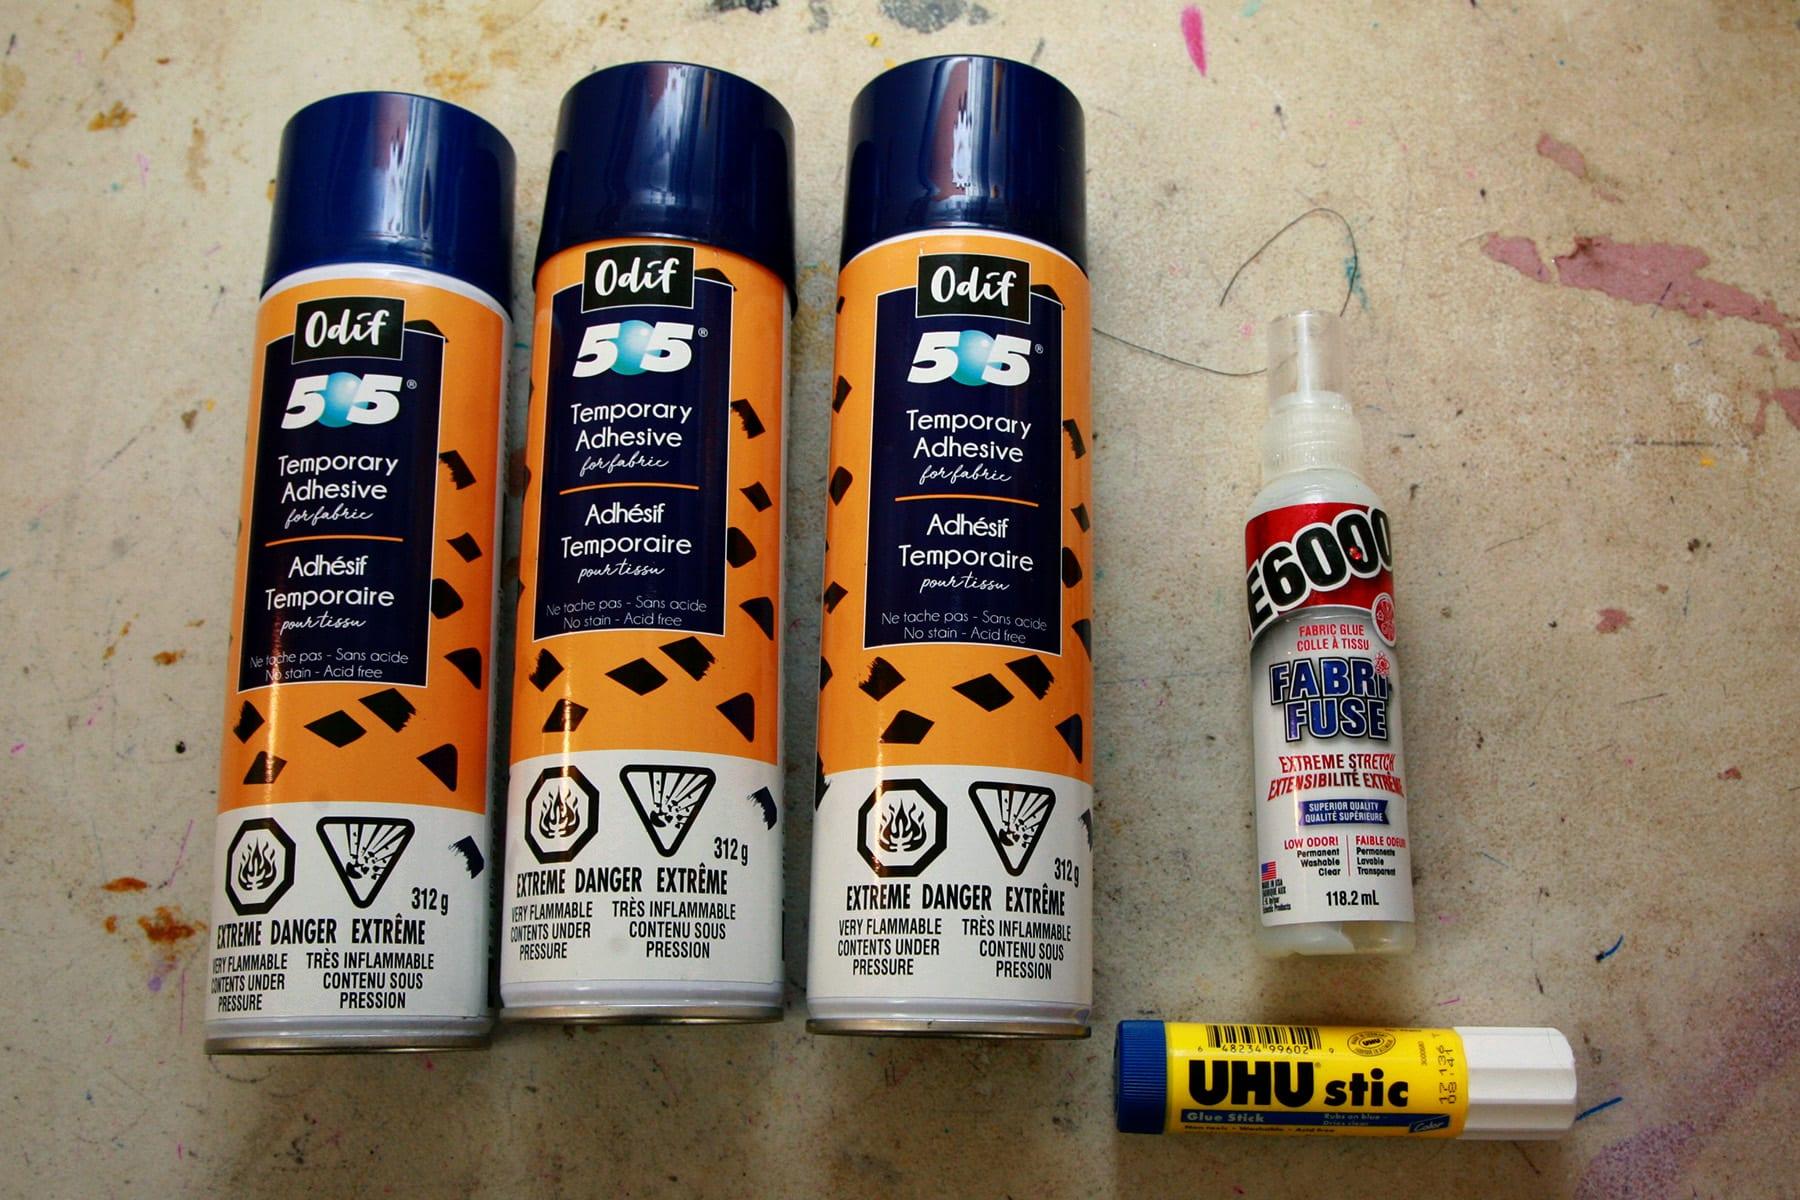 3 bottles of 505 spray adhesive are laid out next to a bottle of E-6000 Fabri-Fuse, and a glue stick.